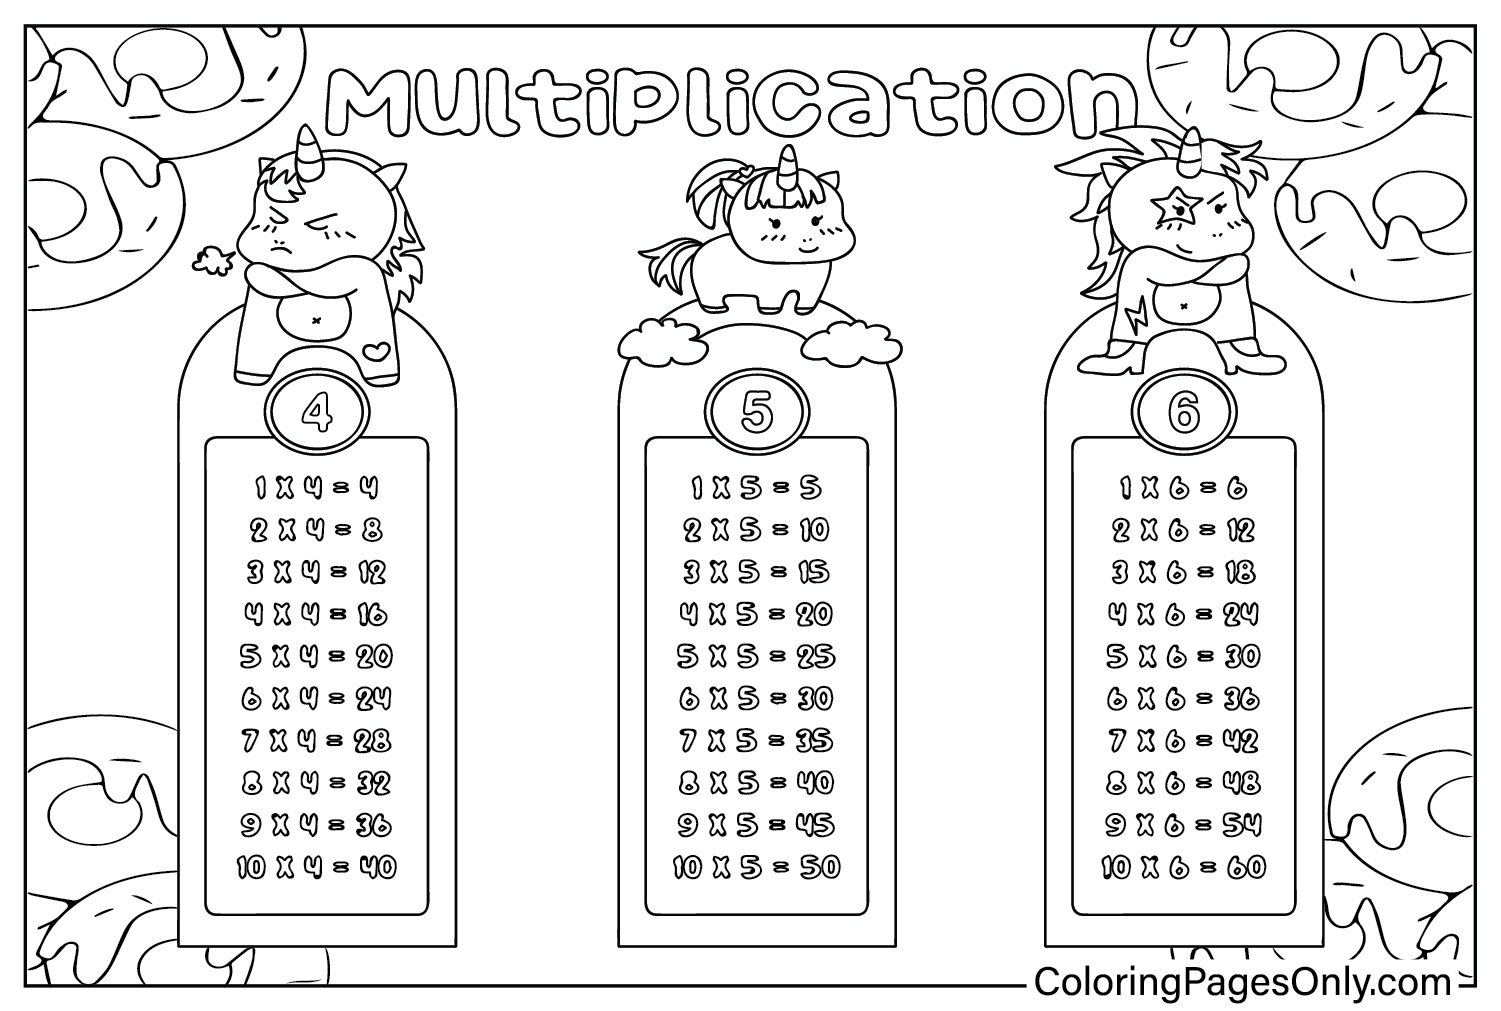 Multiplication Chart Coloring Pages to Download from Multiplication Chart